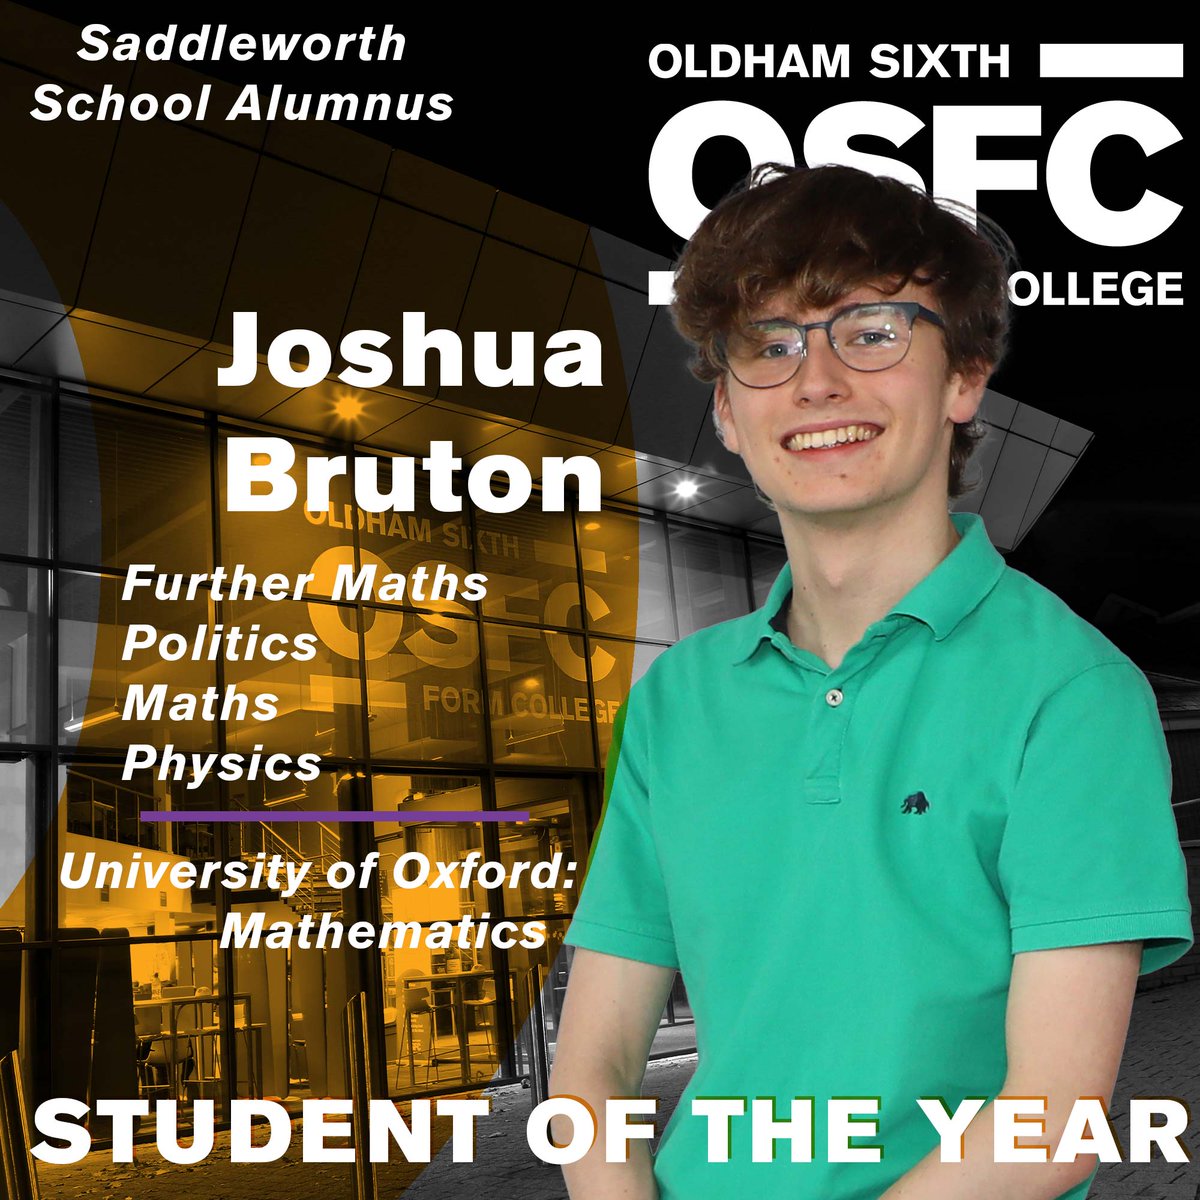 Josh achieved phenomenal A*A*A*B grades in his A Level studies in Maths, Further Maths, Physics and Politics after joining OSFC from @saddleworth_sch. Josh is now studying Maths at @UniofOxford #WeAreOSFC #StudentSuccess #Alumni